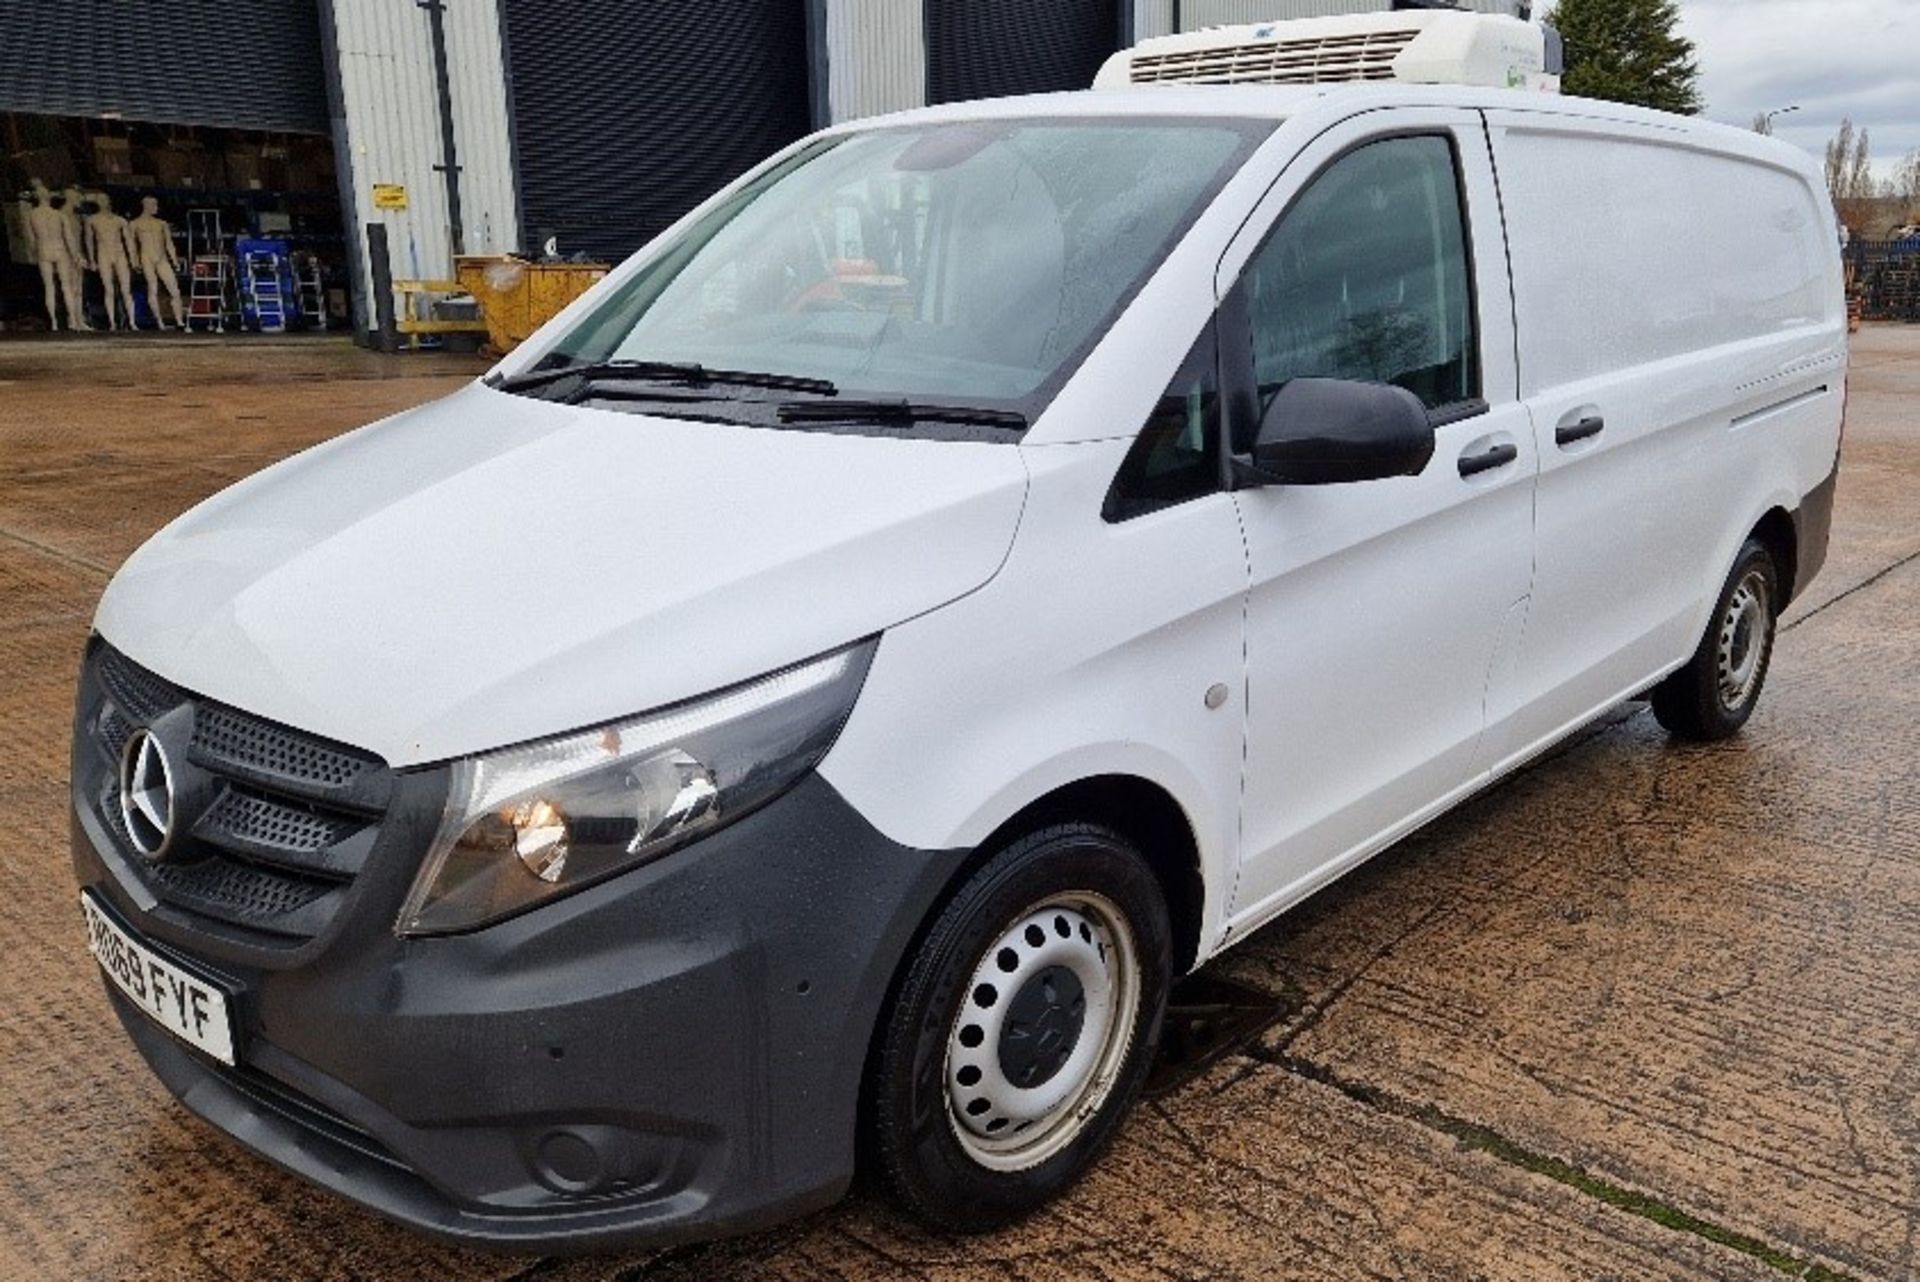 WHITE MERCEDES-BENZ VITO 114 PURE CDI DIESEL PANEL VAN 2143CC FIRST REGISTERED 11/12/2019 REG: - Image 2 of 10